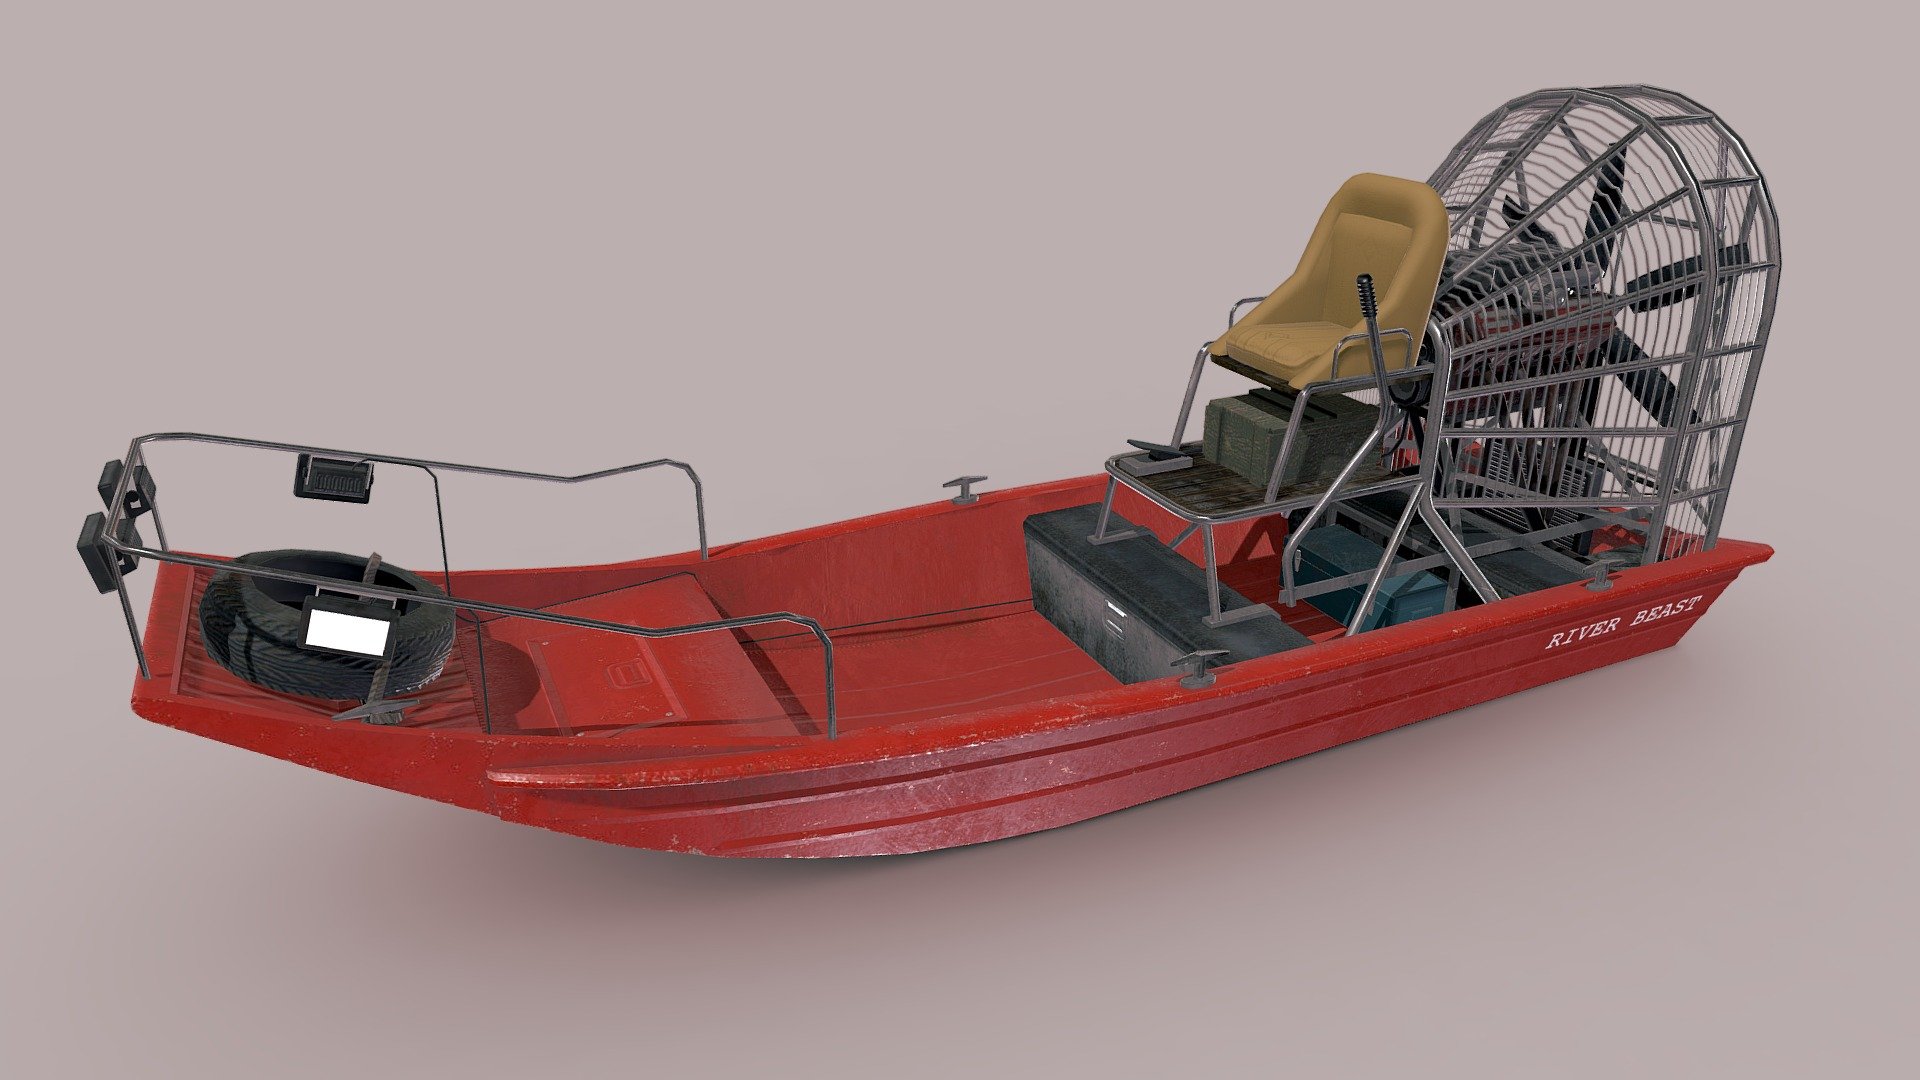 Airboat or swamp boat




-Low-poly ready to use in Games

-Created in 3ds MAX 2018 no plugins used.

-Textures are in PNG format 2048x2048 PBR metalness 1 set textures

-Files unit: Centimeters

-Available formats:MAX 2018 and 2015, OBJ, MTL, FBX, .tbscene.

-separate texture files for unity (Metallic Smoothness and Specular Smoothness) and unreal engine PNG format

-If you need any other file format you can always request it.

-All formats include materials and textures.
 - Airboat Low-poly - Buy Royalty Free 3D model by MaX3Dd 3d model